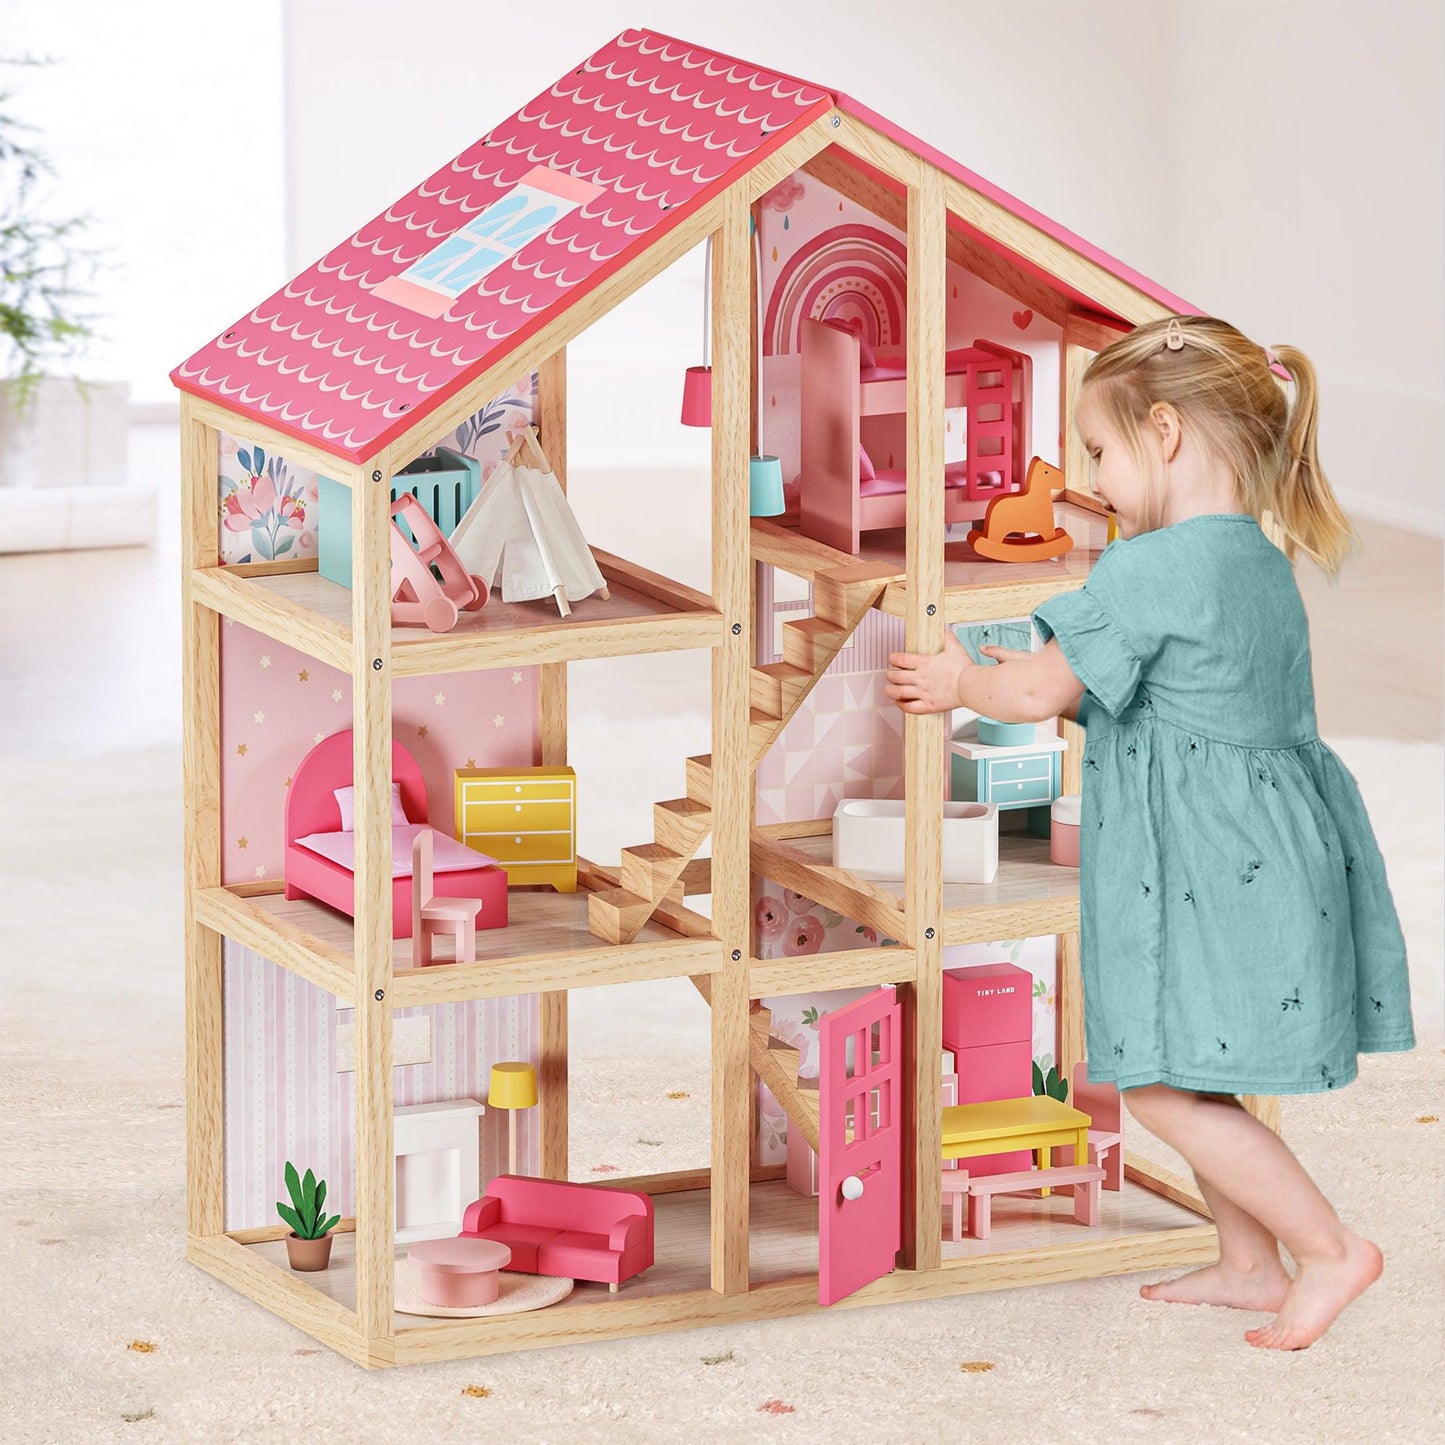 Tiny Land® Love Dollhouse with 30 Furniture